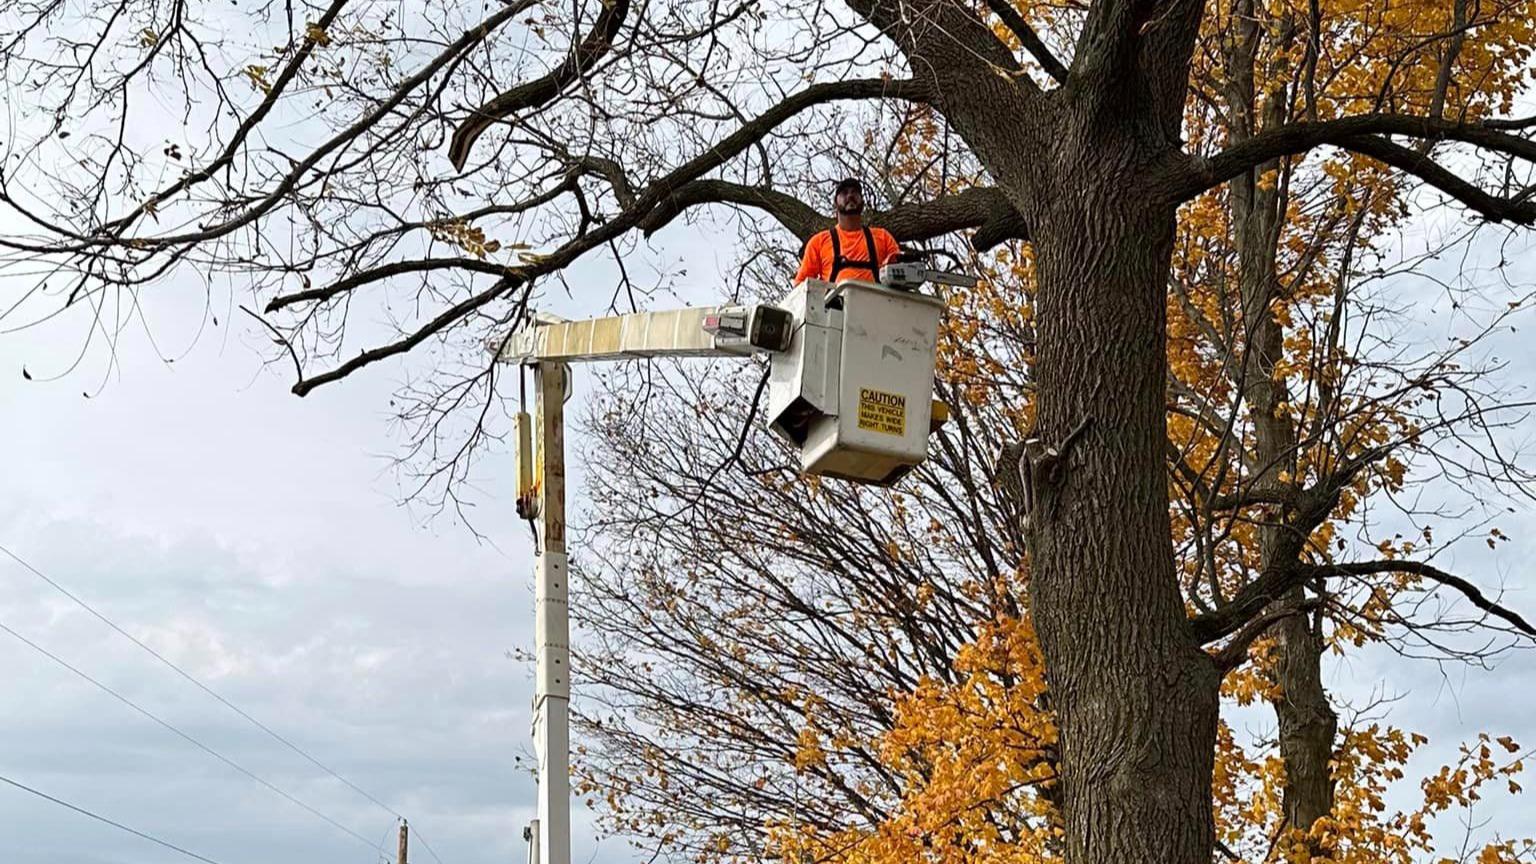 Enhance the health and appearance of your trees with S&P Tree Professionals' tree trimming services. Our skilled professionals provide expert trimming to maintain the shape and vitality of your trees, ensuring they thrive and remain an attractive part of your outdoor space.